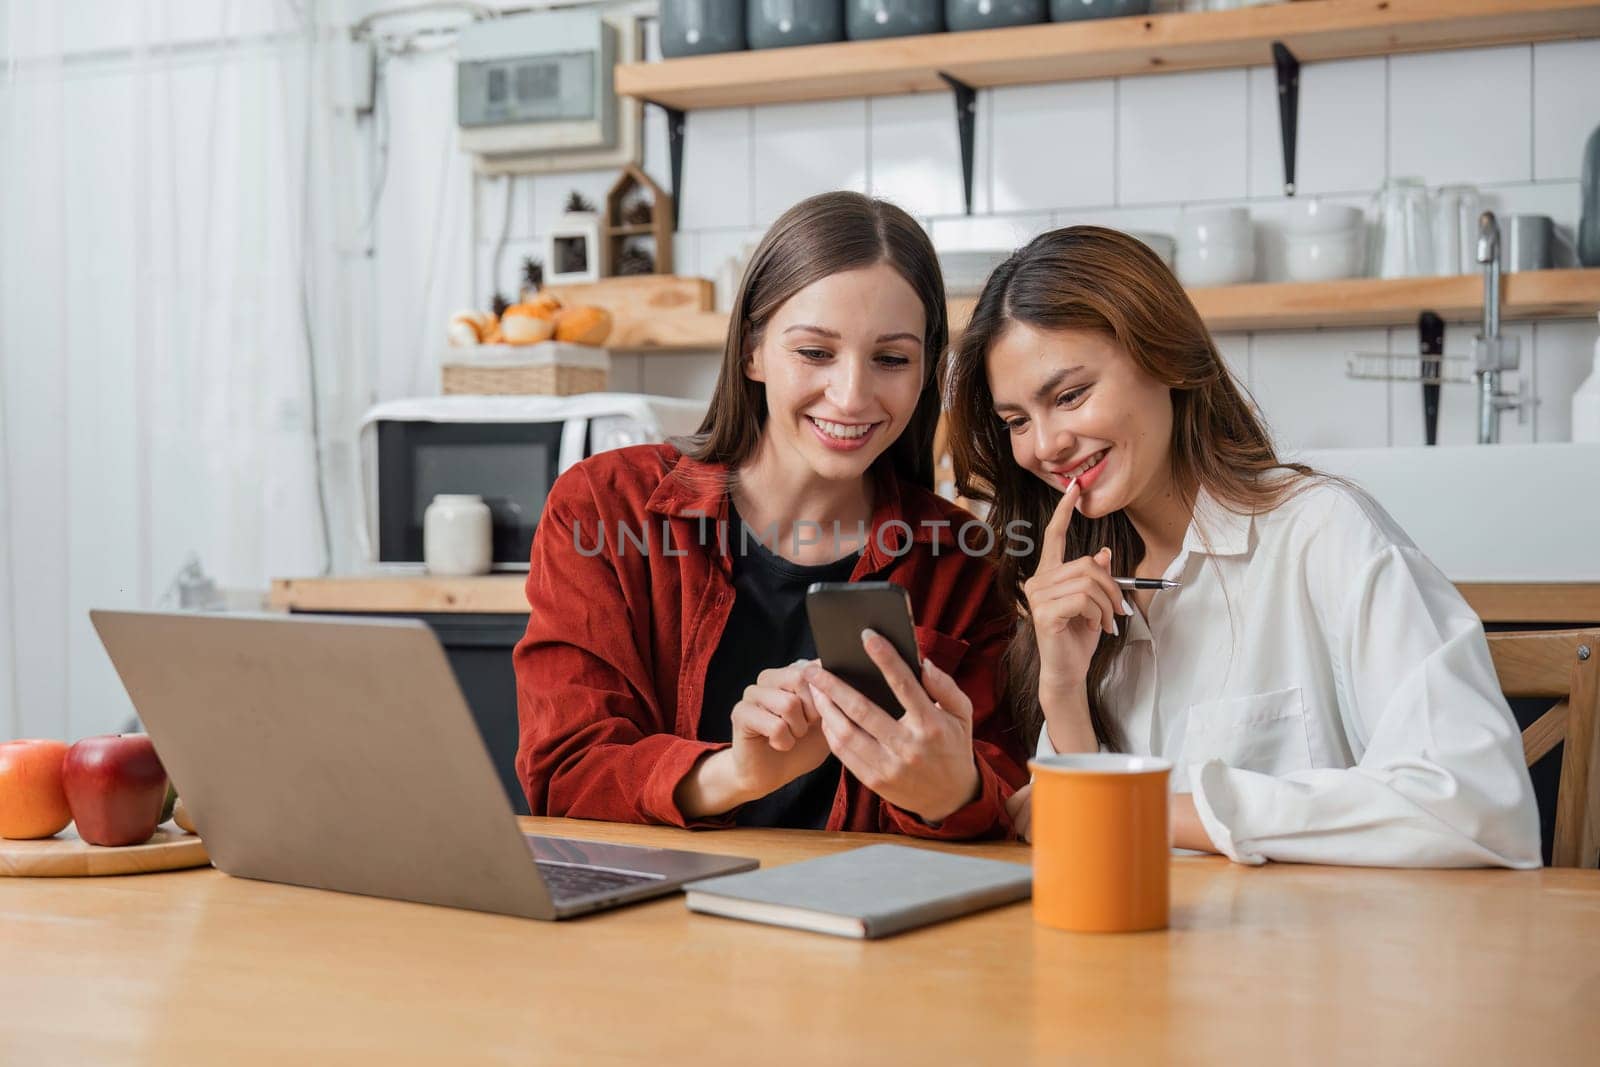 Two teenage girls are happy to receive messages from phone, social media in the kitchen.